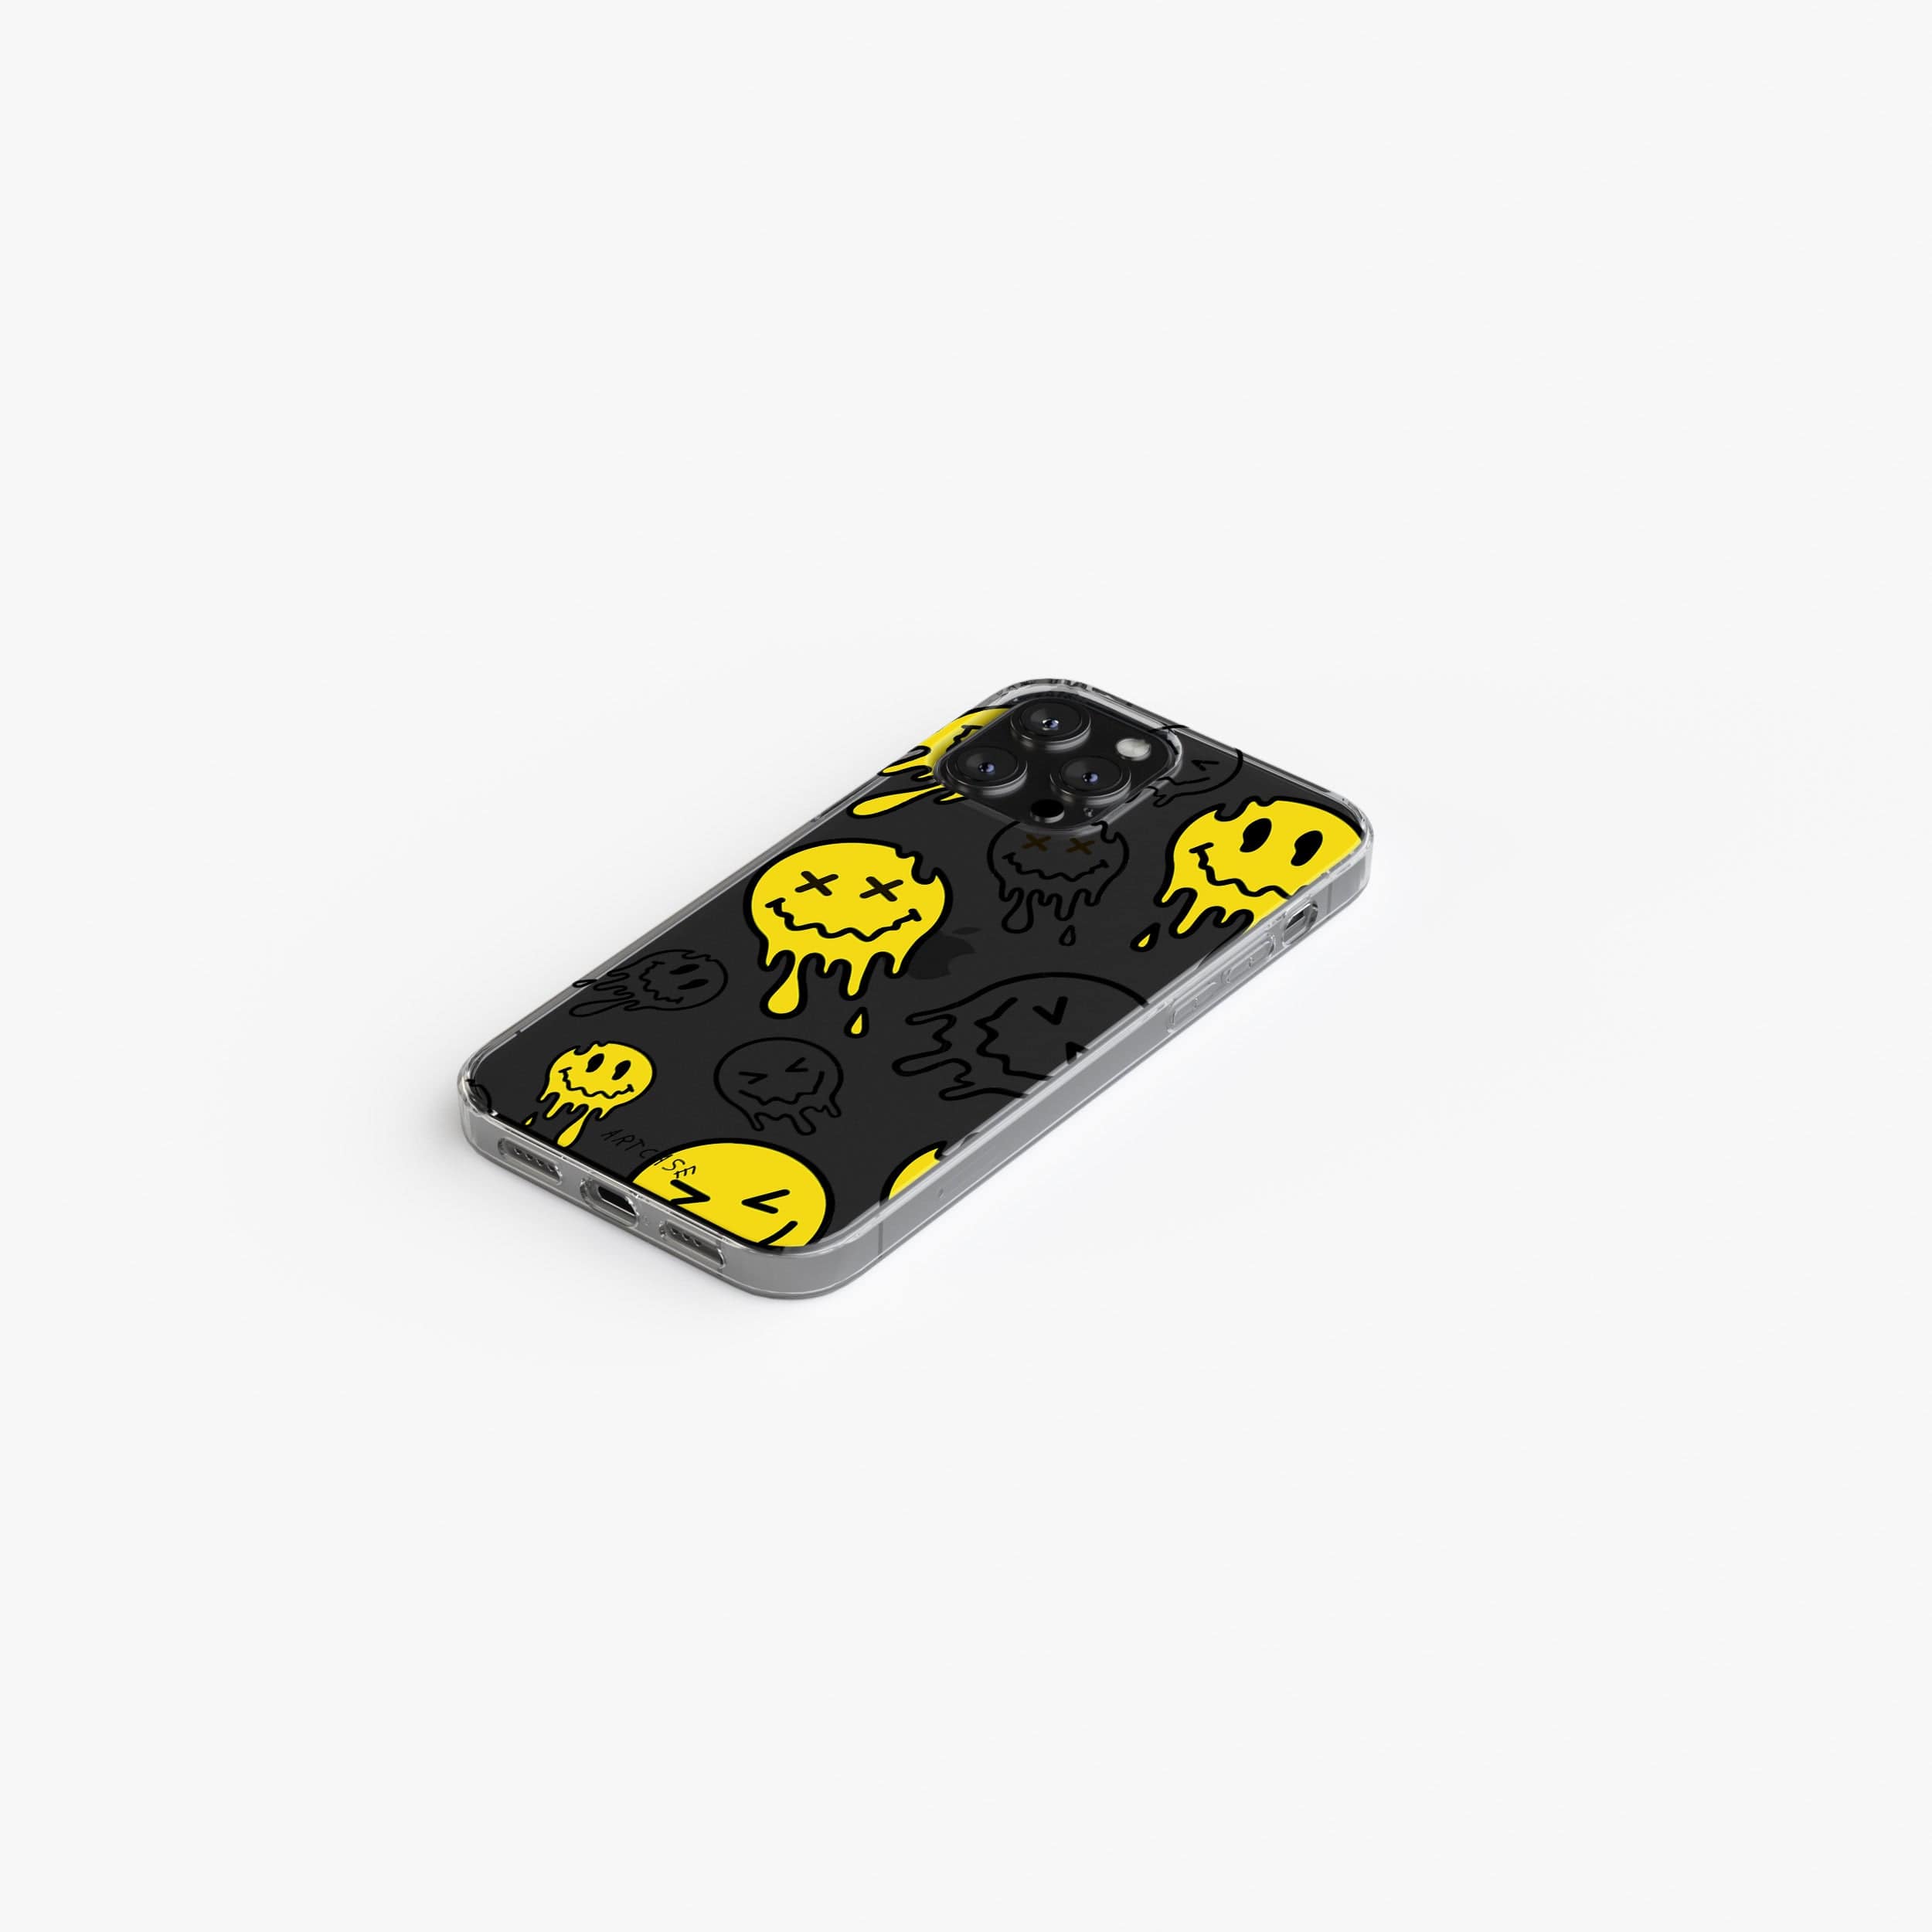 Transparent silicone case "Scarry smiles"